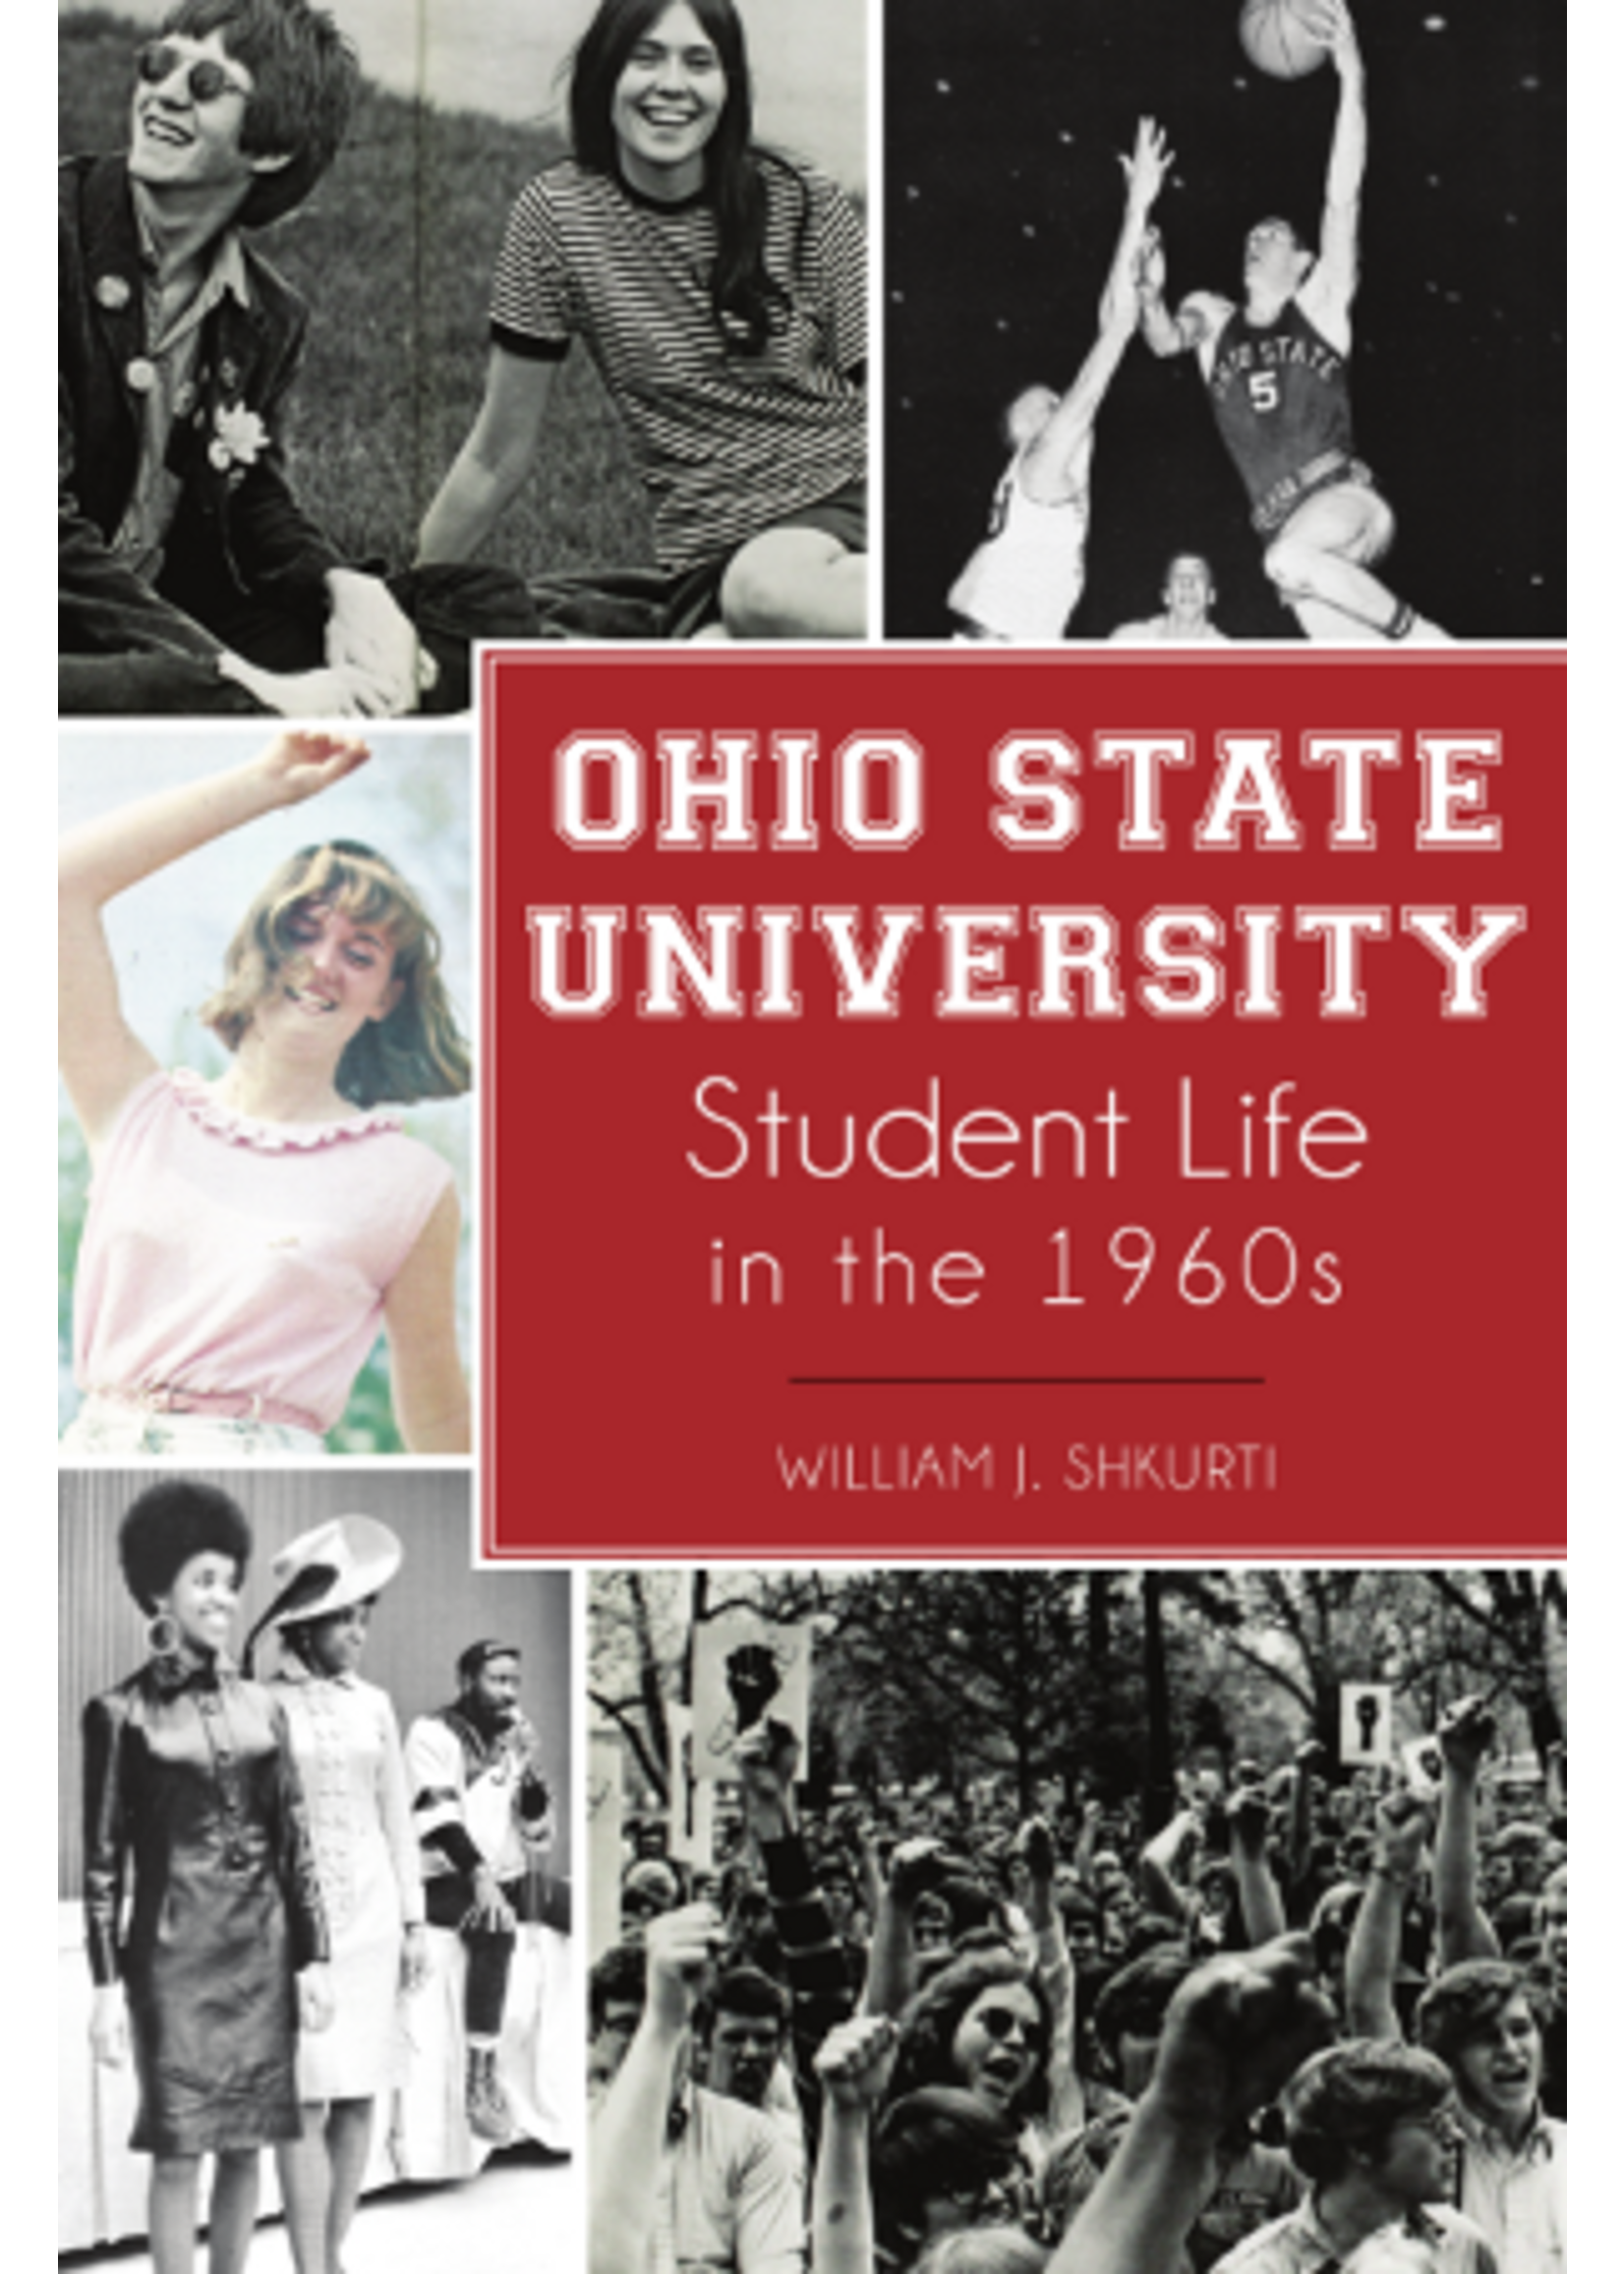 Ohio State University - Student Life in the 1960's